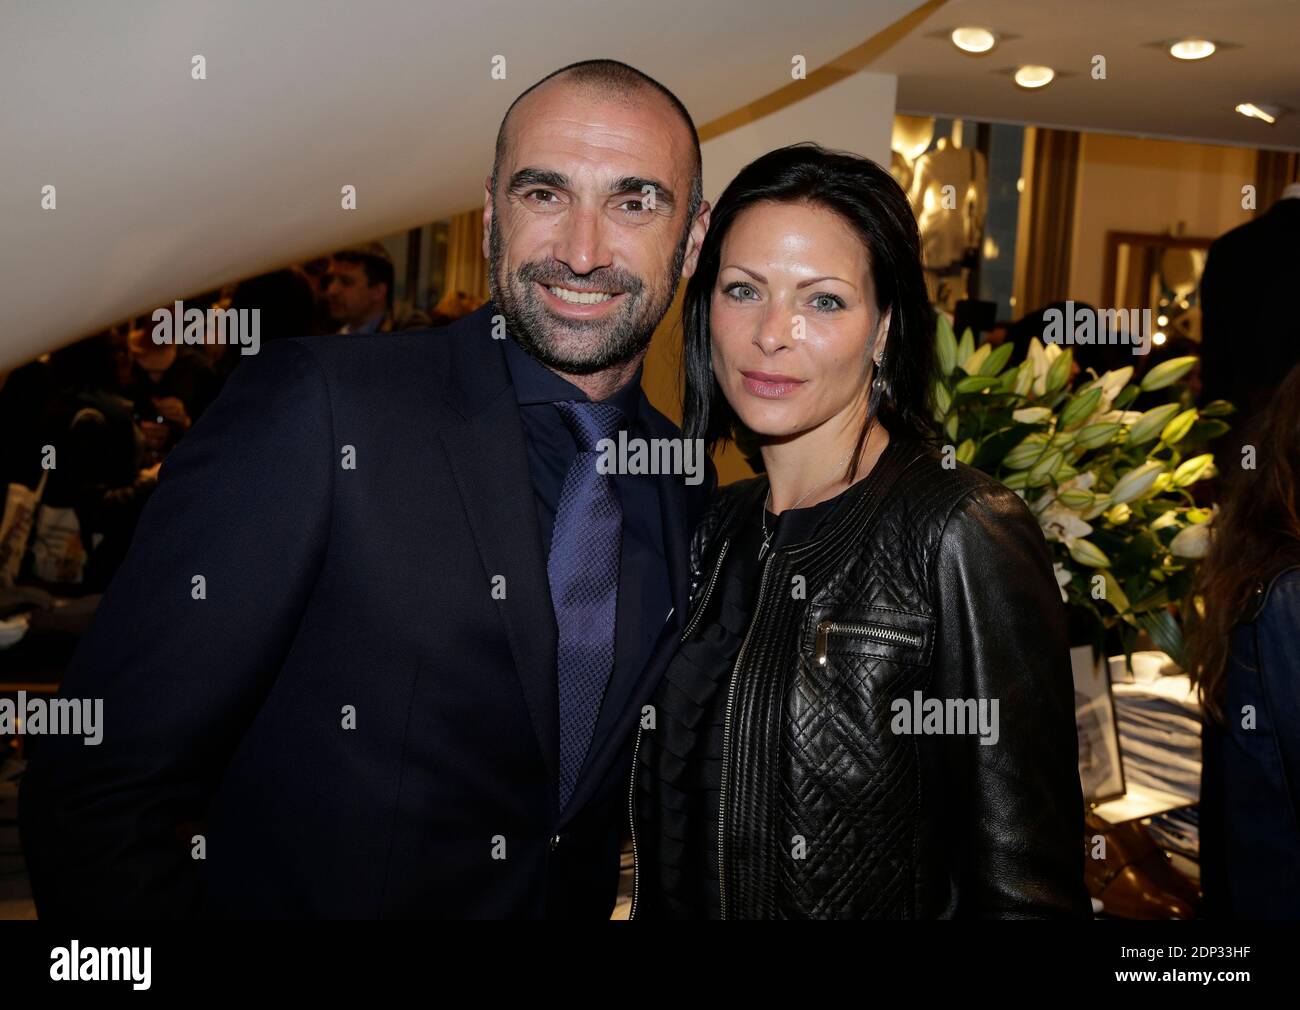 Jerome Alonzo and his wife Jessica attending Tommy Hilfiger boutique opening party in Paris, France, March 31, 2015. Photo by Jerome Domine/ABACAPRESS.COM Stock Photo